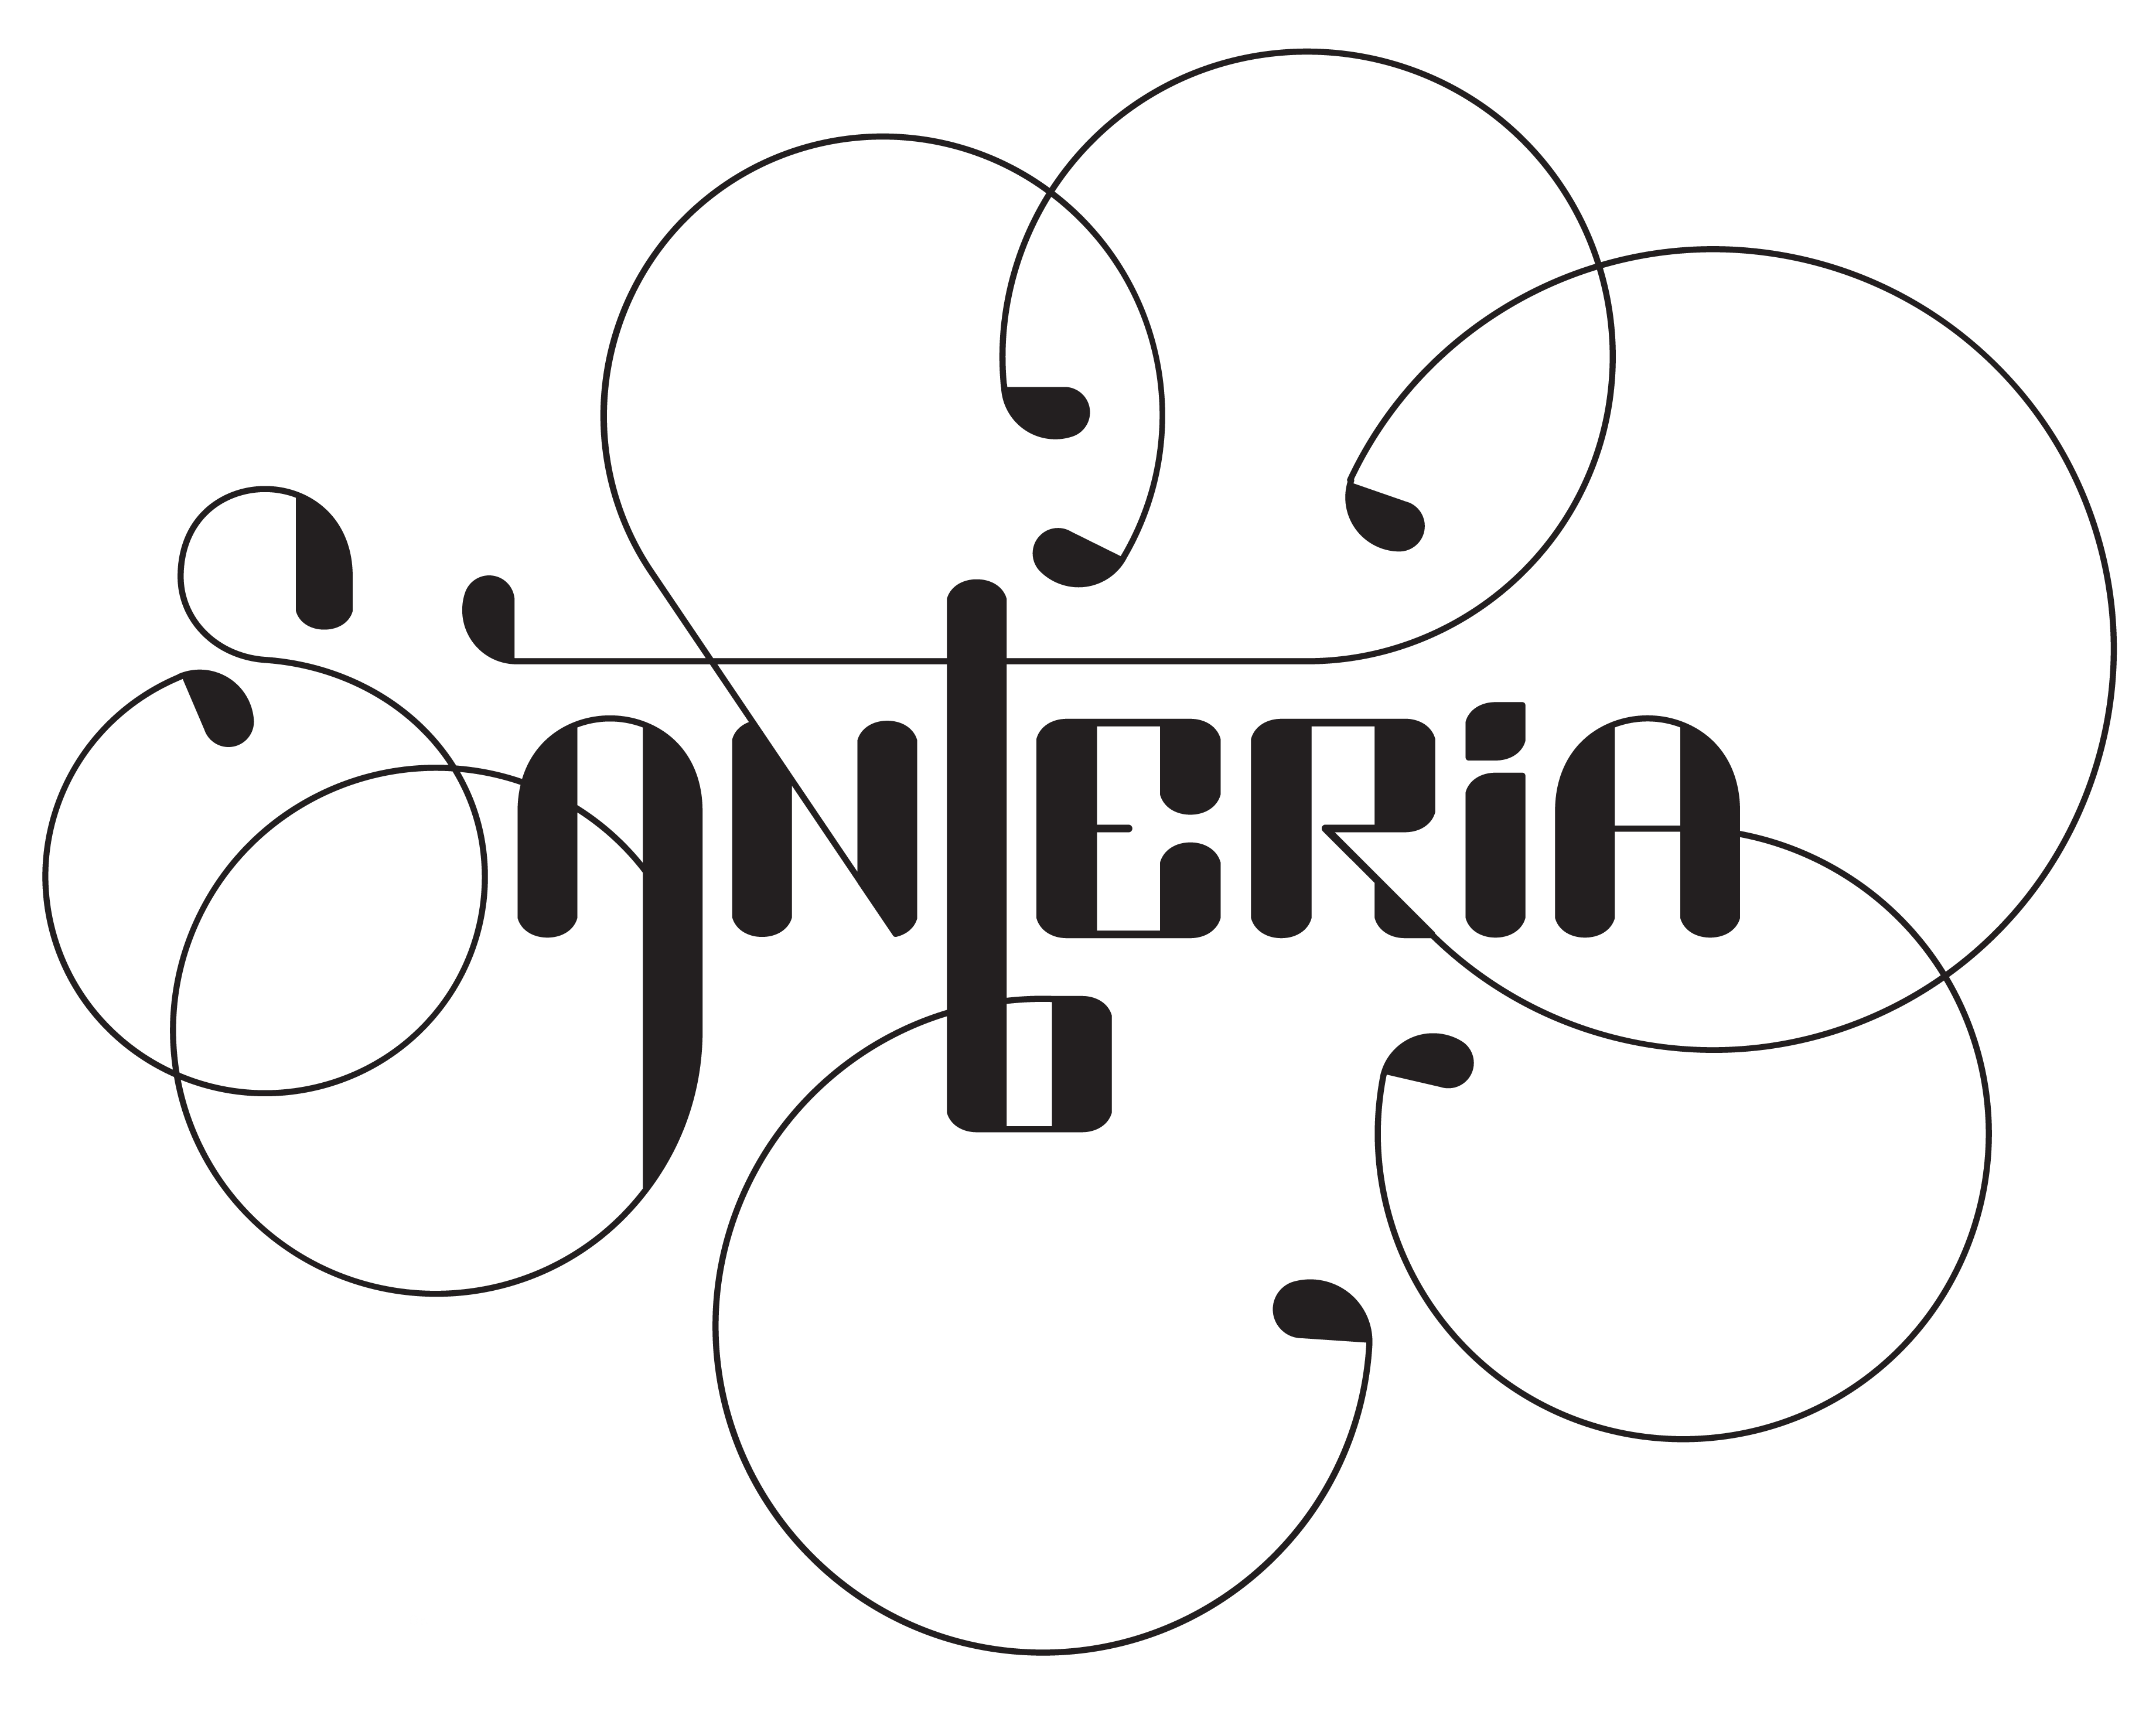 Santeria | Santeria is a mutable typeface I designed to look like lettering when it is typeset.